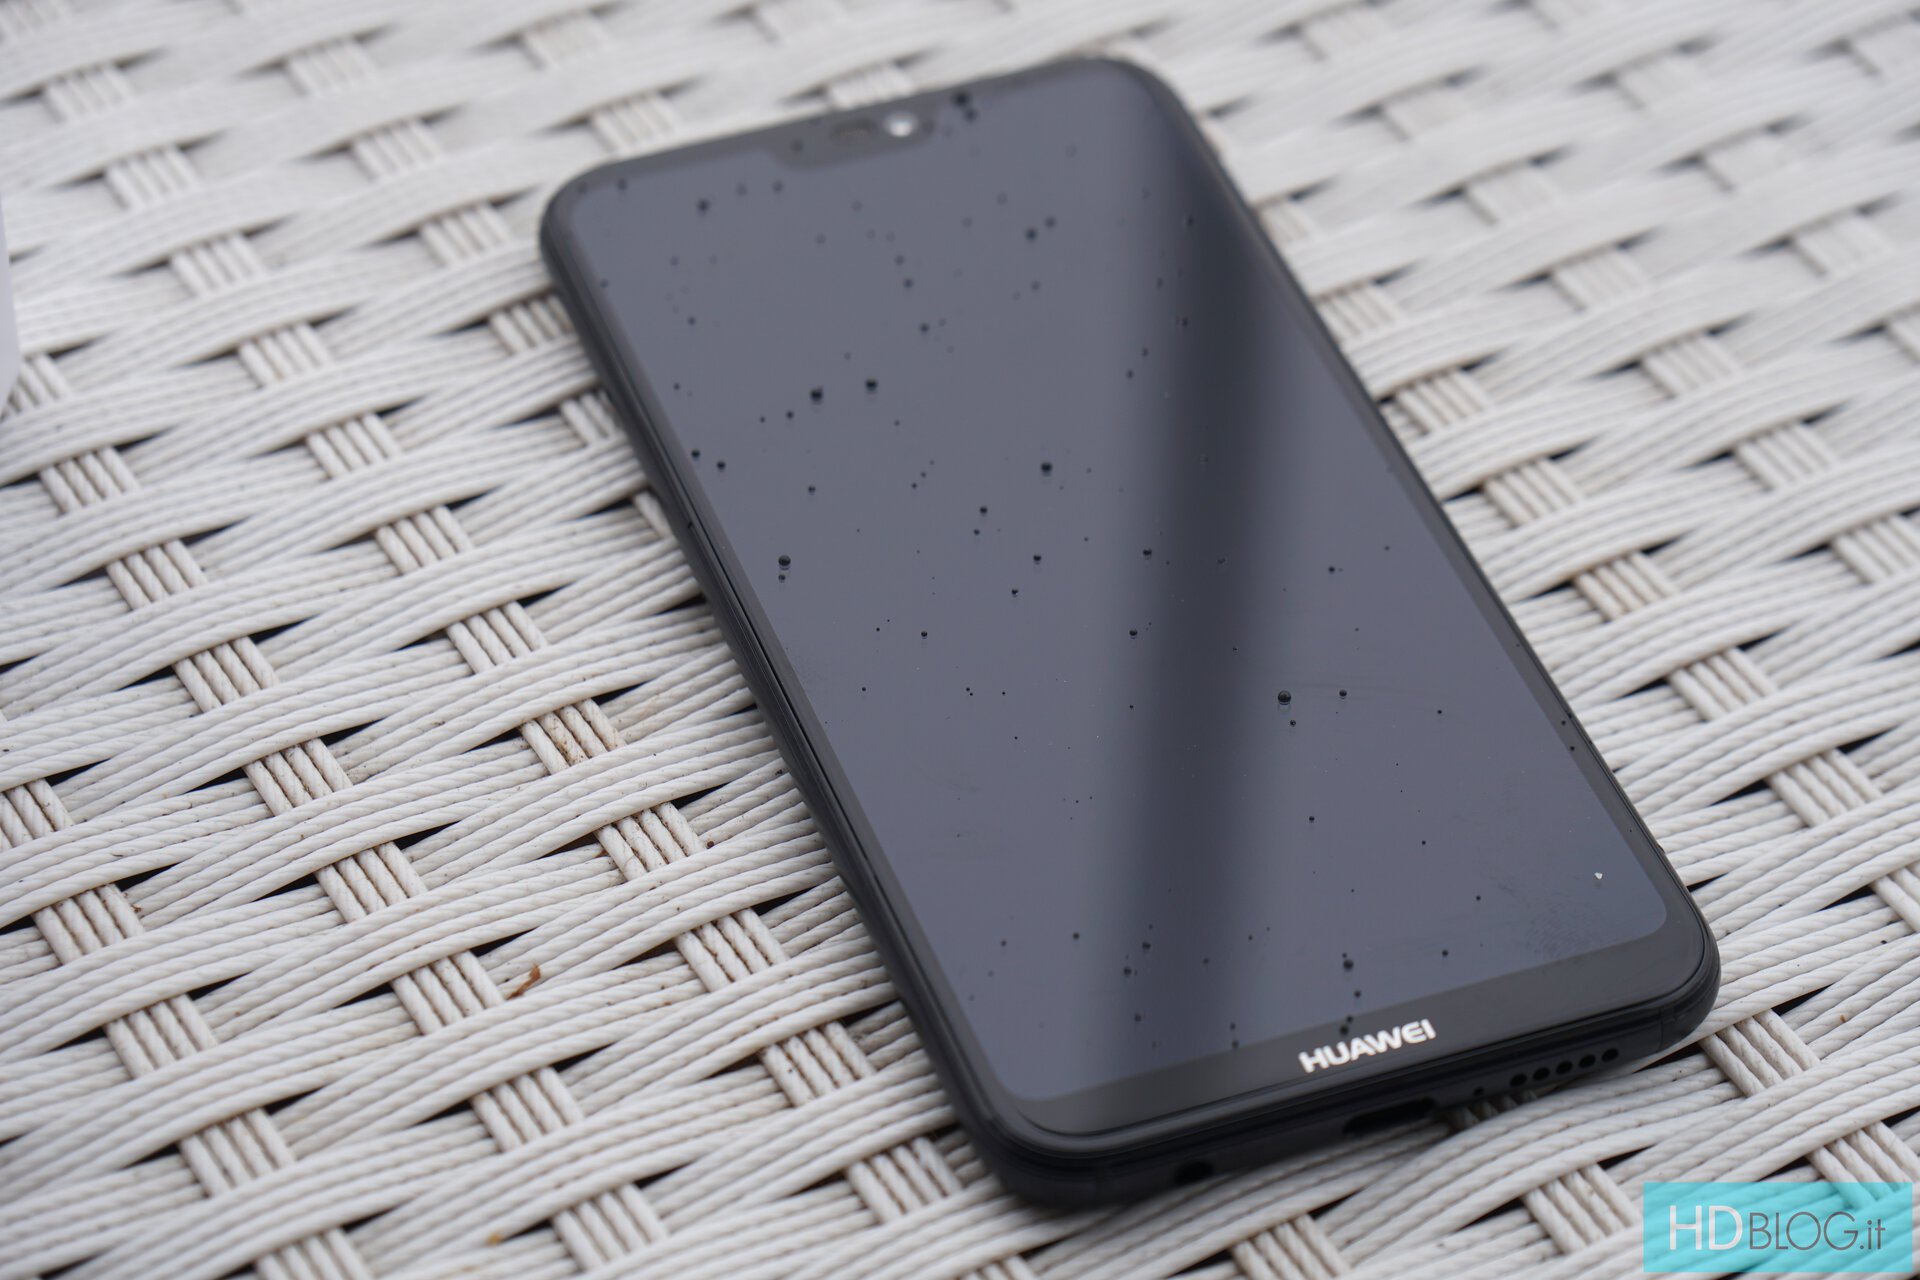 Huawei P20 lite (2019) pictures, official photos